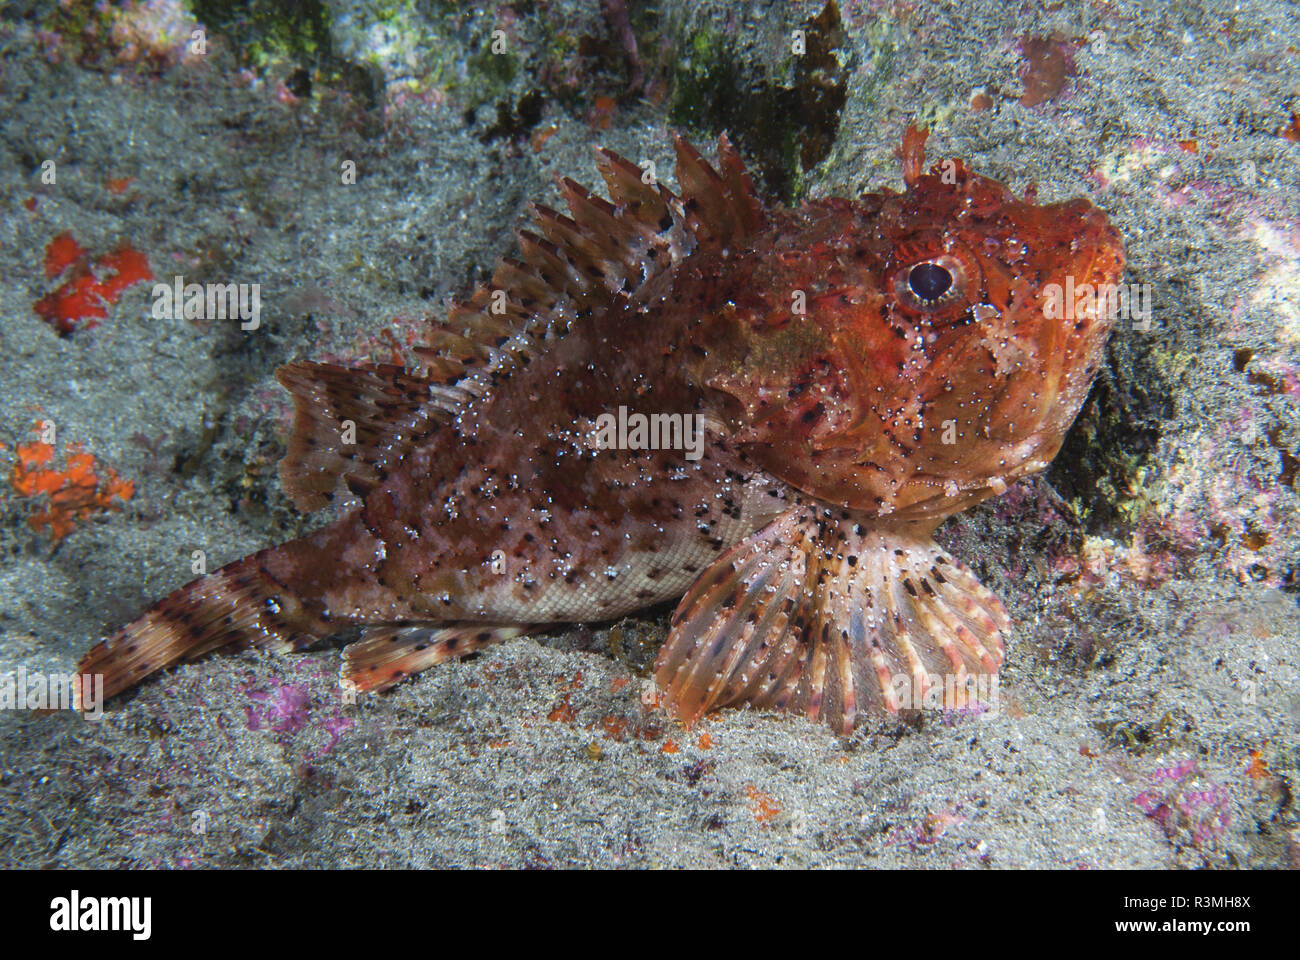 Brown scorpionfishes (Scorpaena porcus), Tenerife, Fish of the Canary Islands. Stock Photo